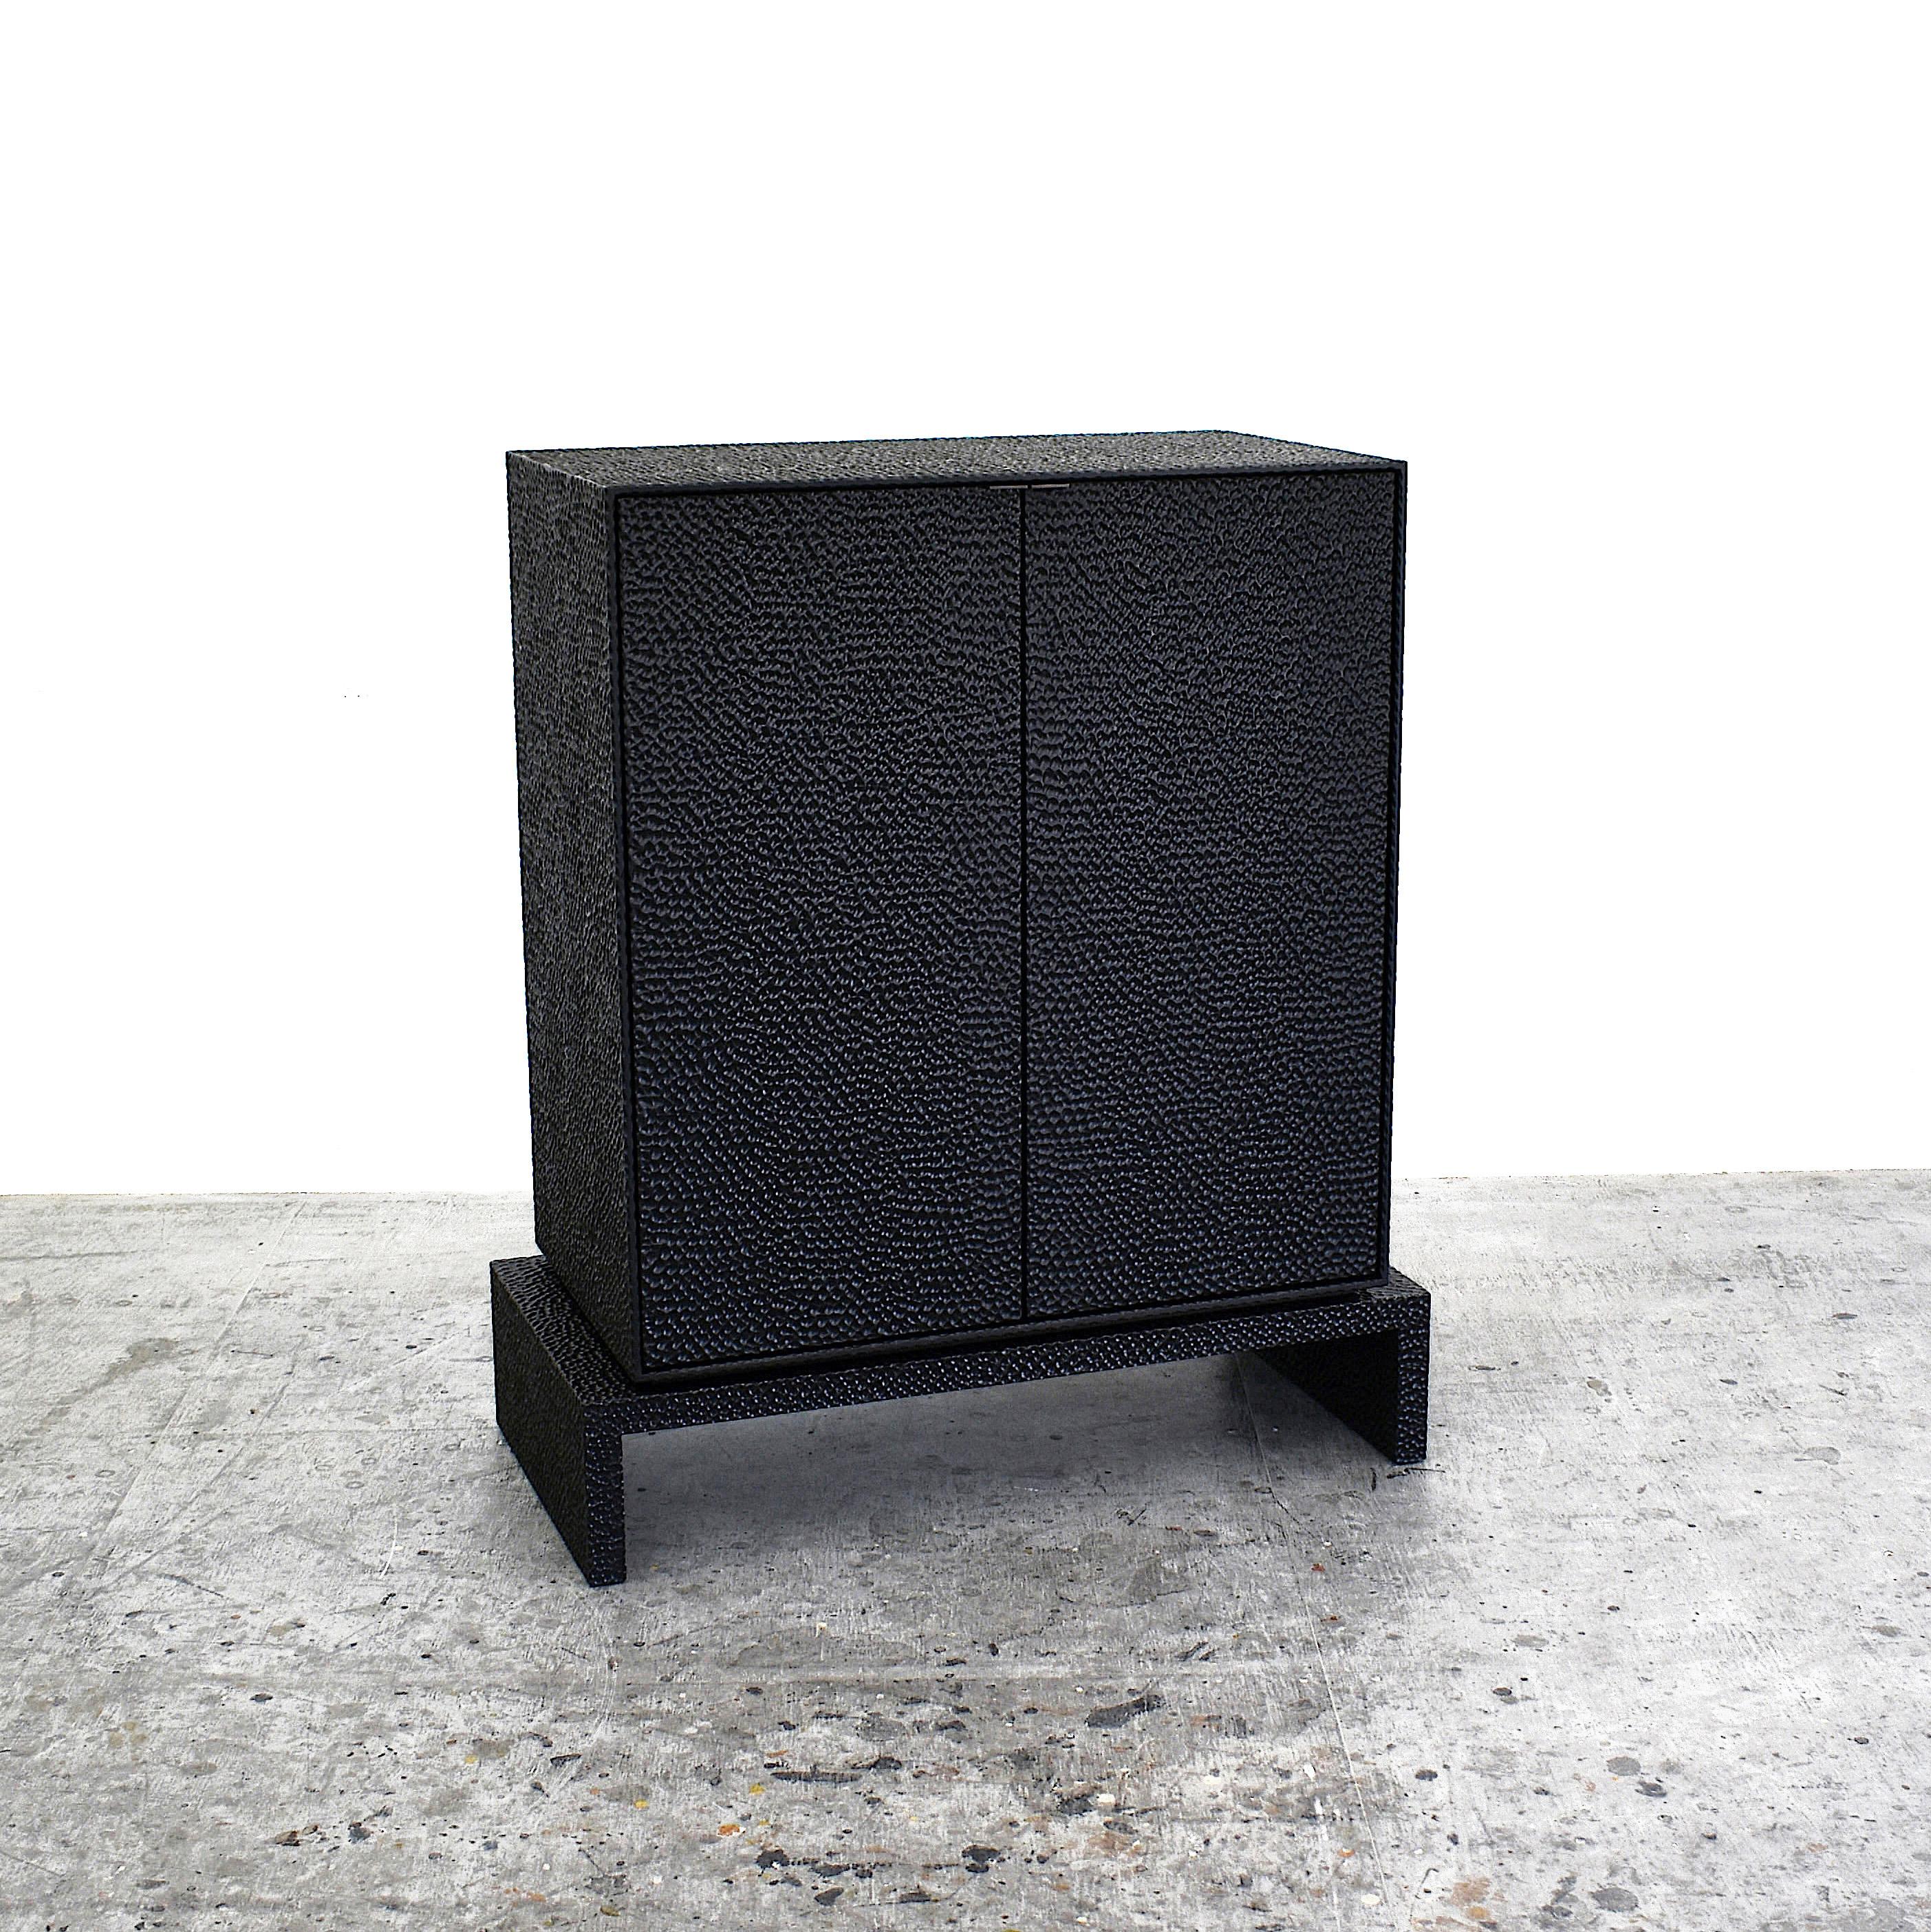 V2 Cabinet Sculpted by John Eric Byers
Dimensions: 106.7 x 91.5 x 45.7 cm
Materials: Carved blackened maple and brass

All works are individually handmade to order.

John Eric Byers creates geometrically inspired pieces that are minimal, emotional,